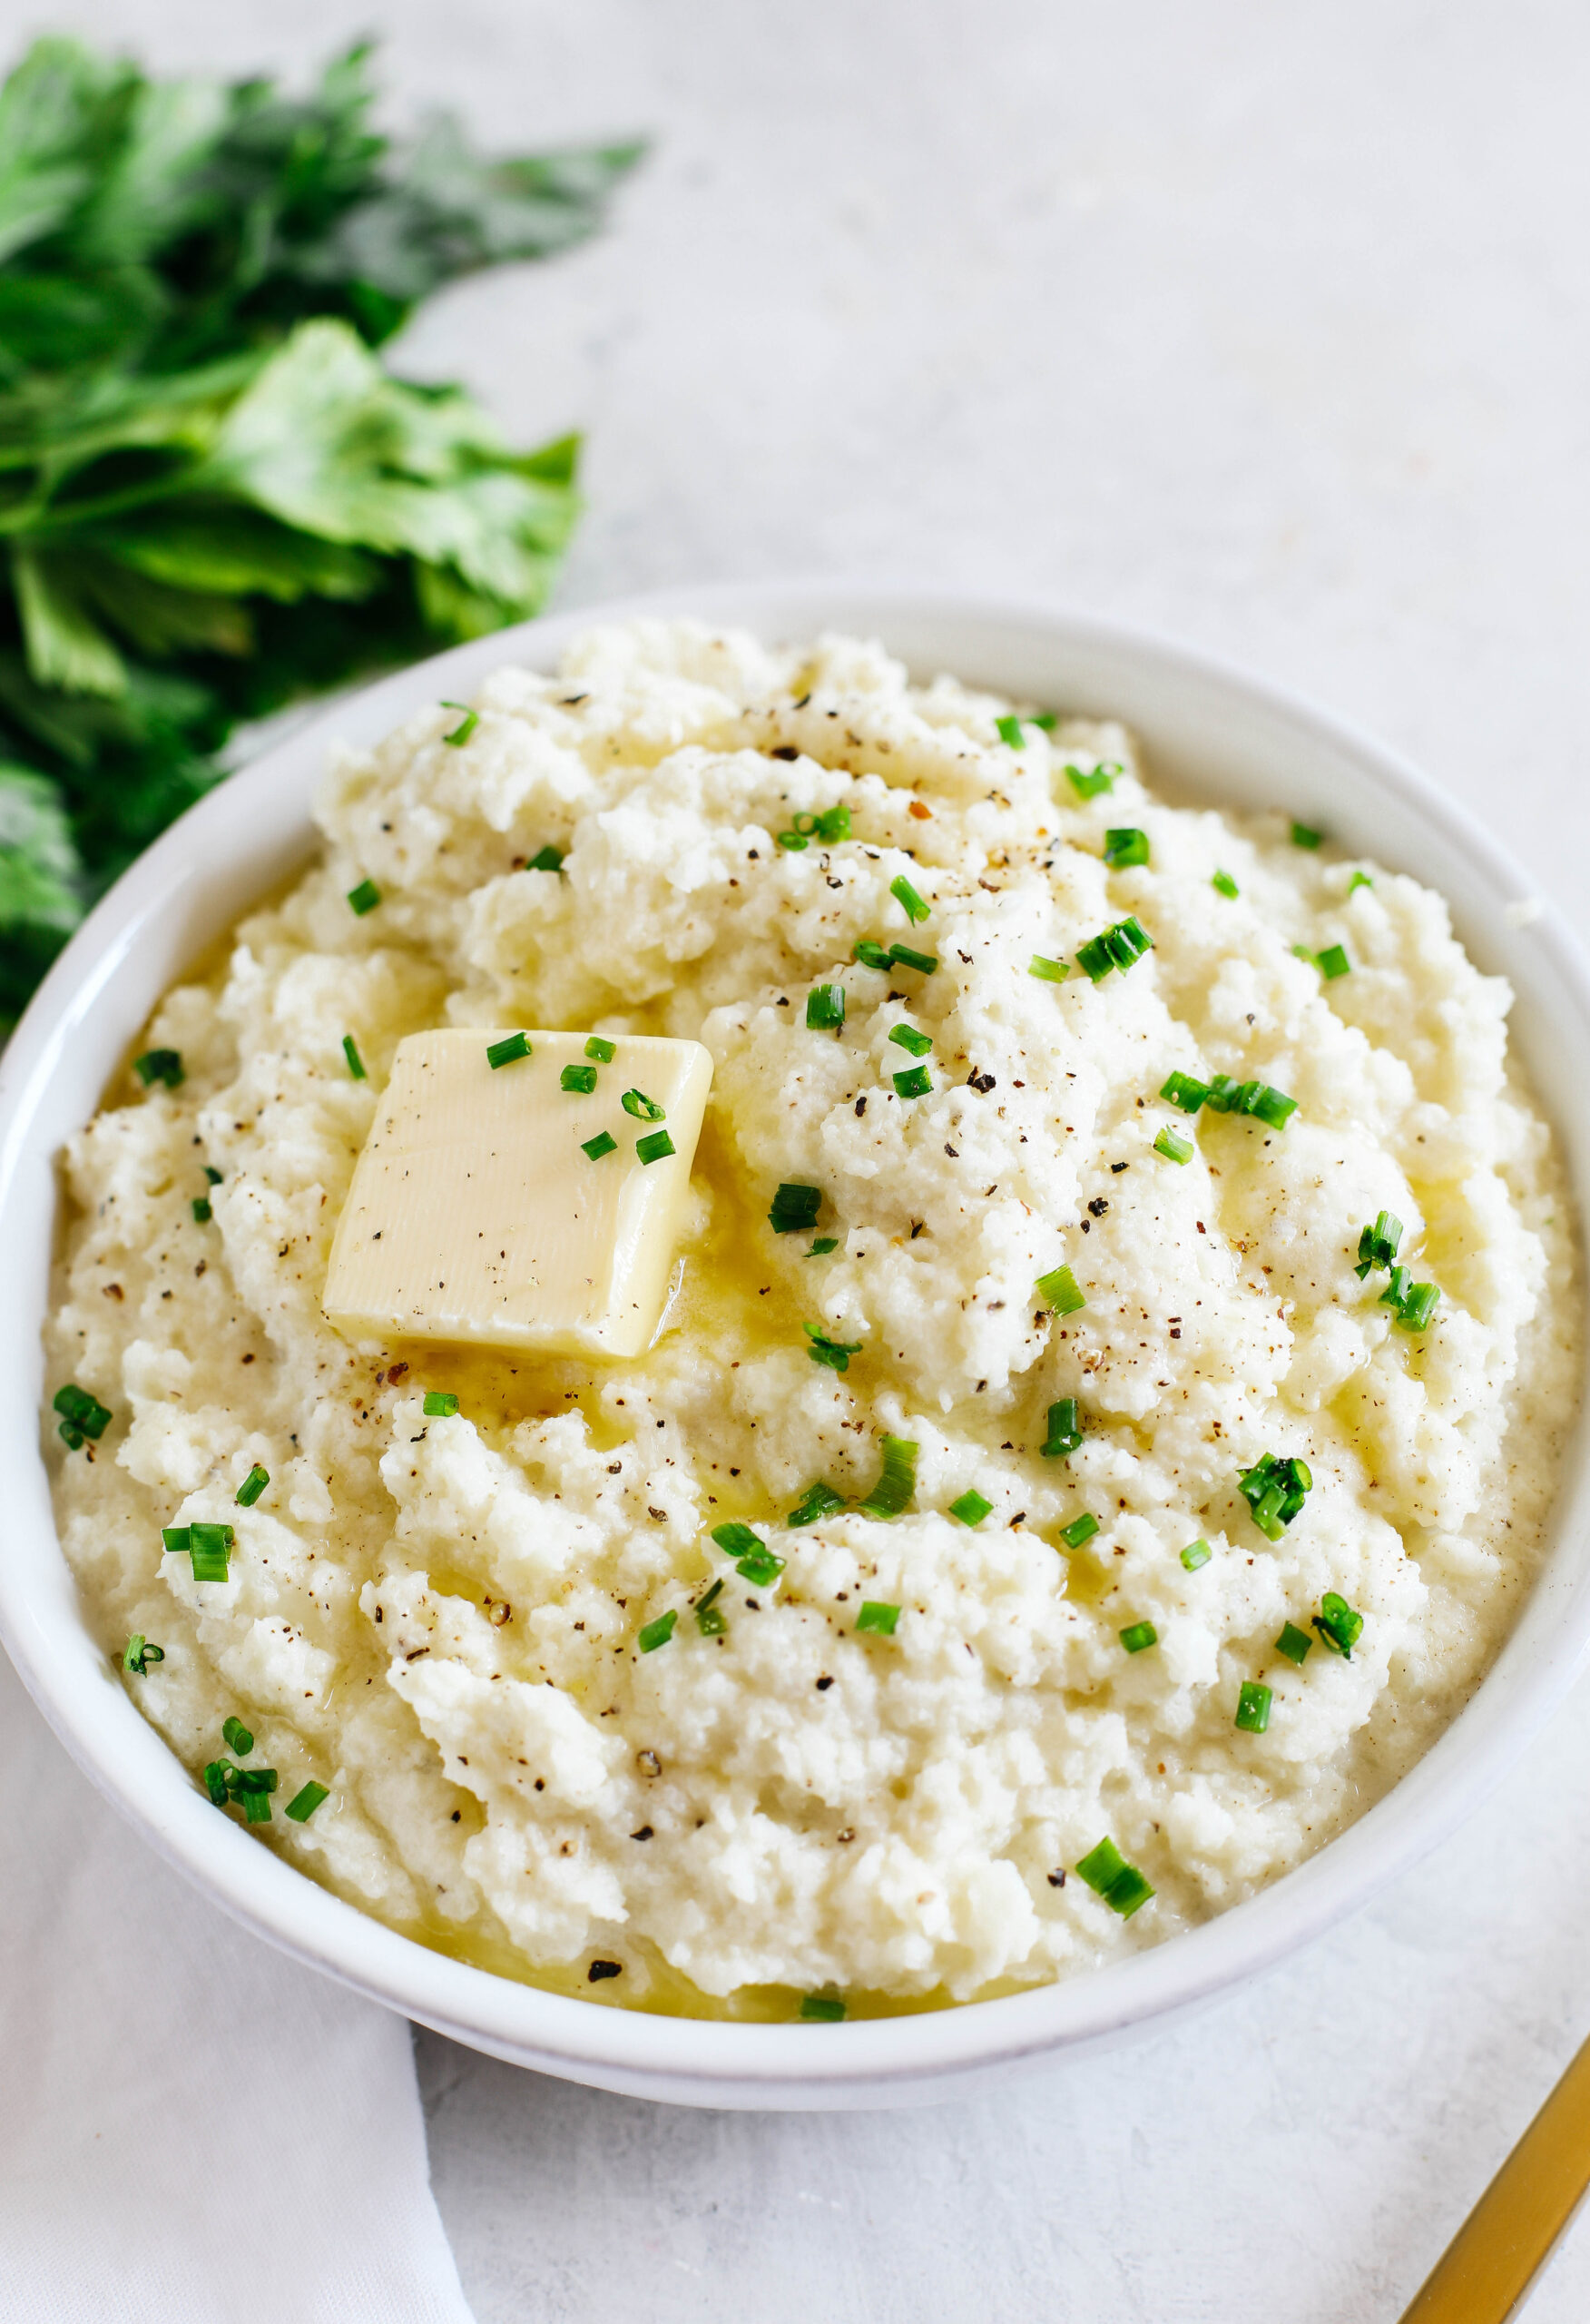 This EASY Mashed Cauliflower is creamy, delicious, and makes the perfect low carb, keto-friendly side dish easily made in under 15 minutes! #keto